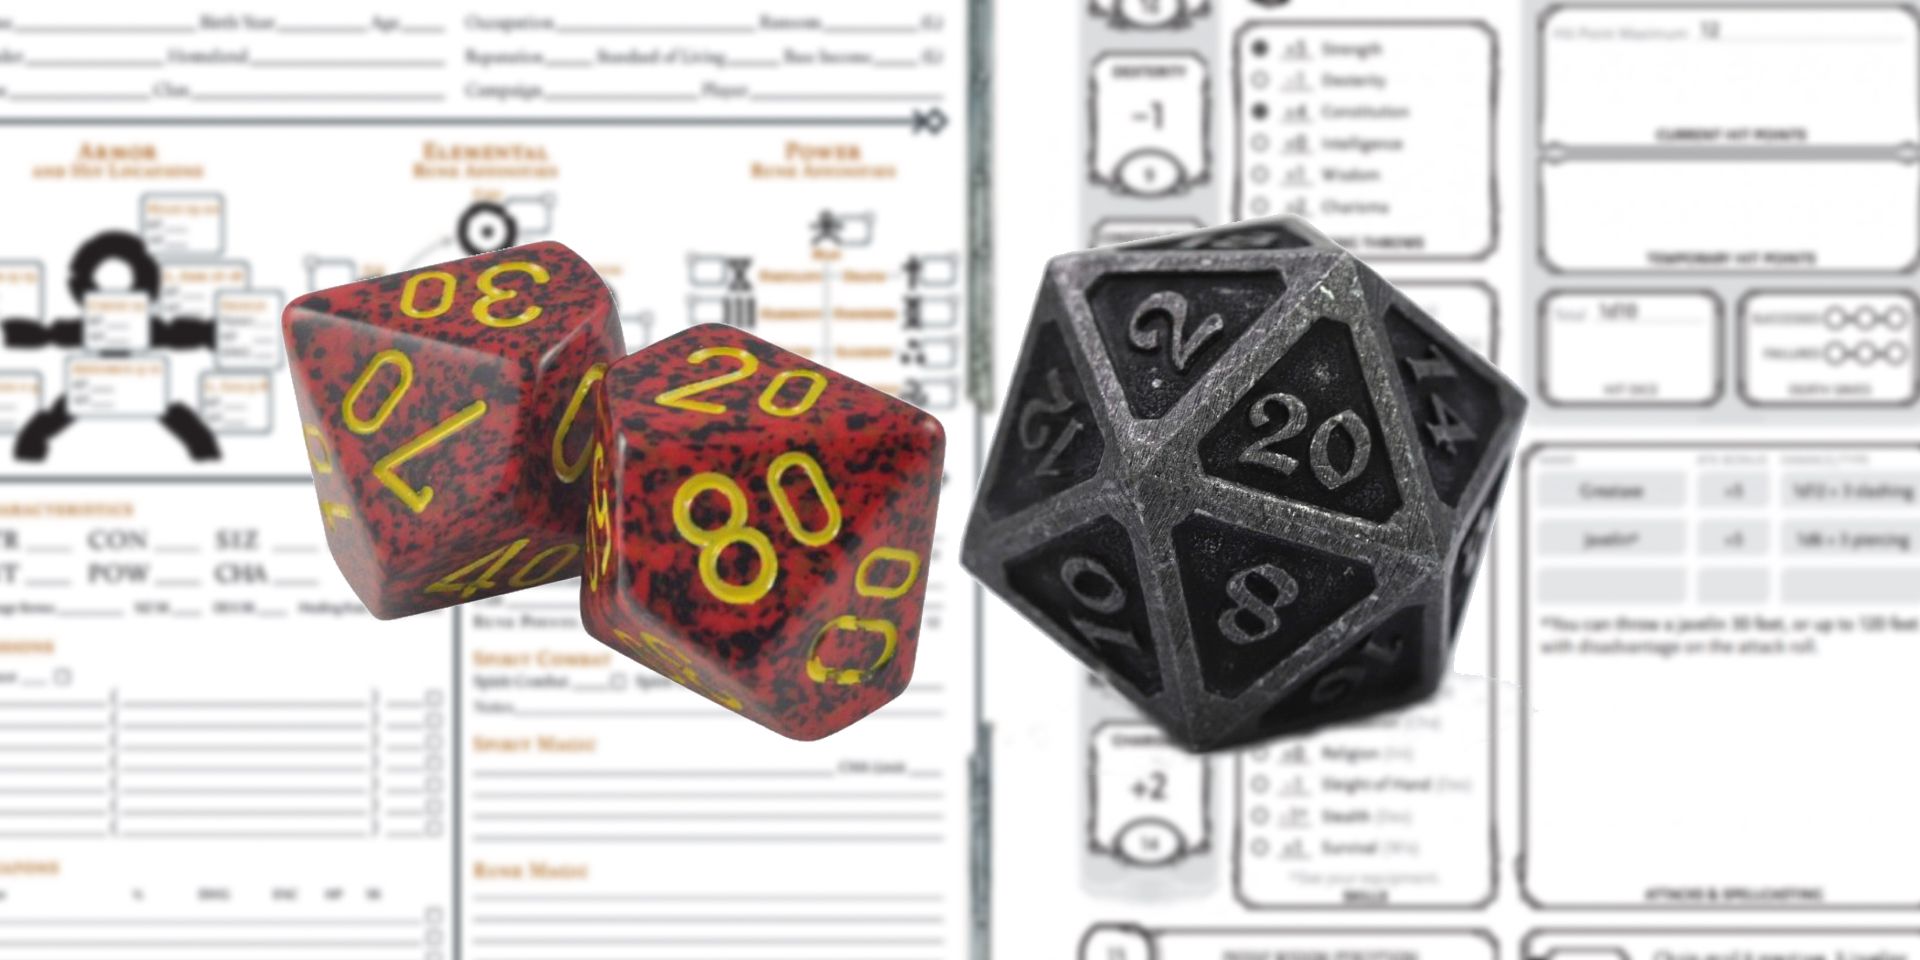 Roll tabletop roleplaying dice